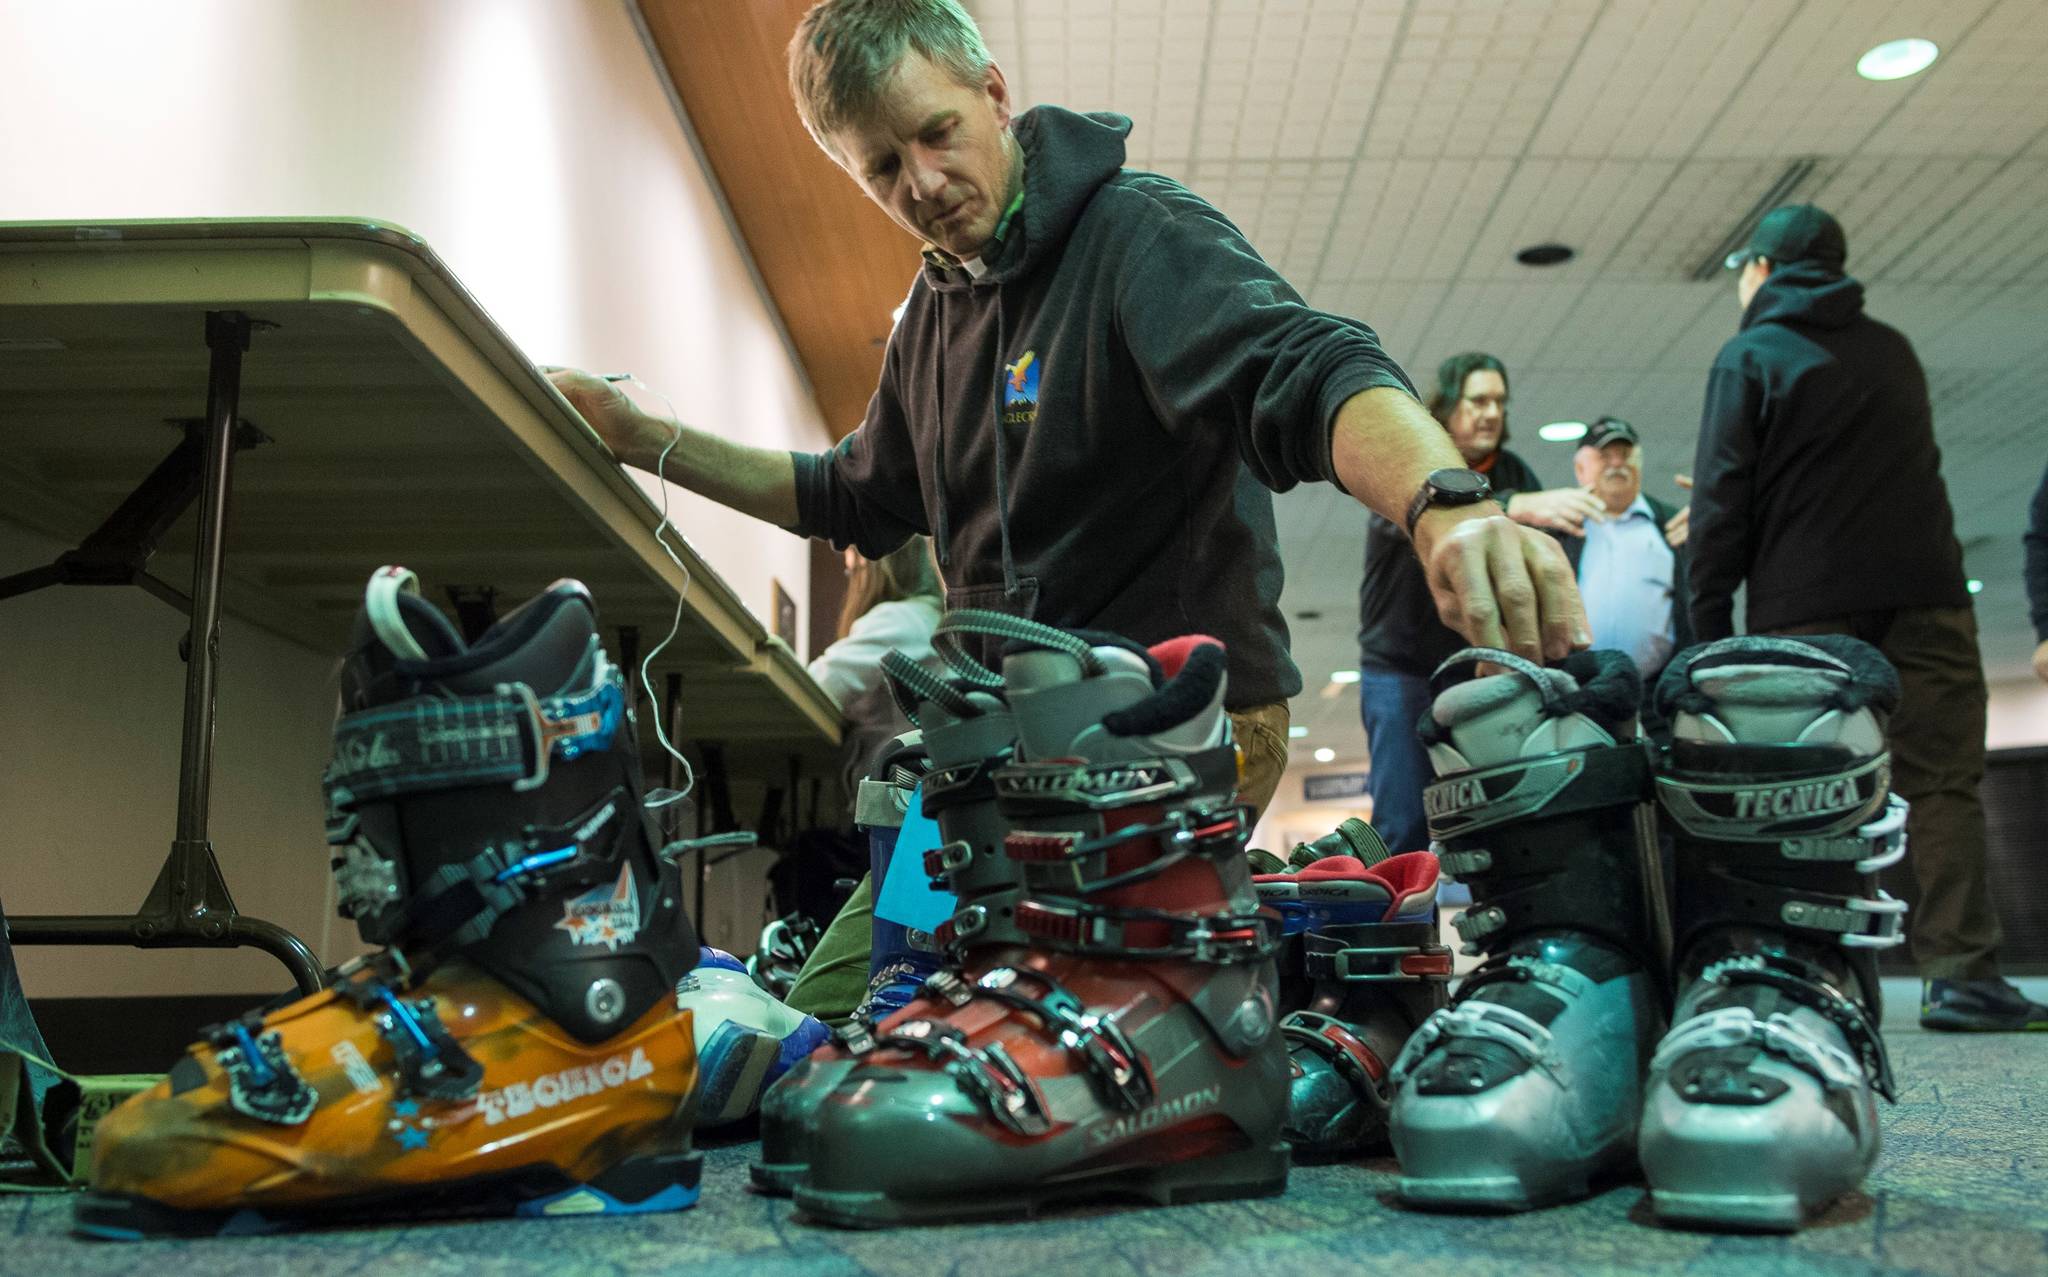 A volunteer handles ski boots to be sold at the Juneau Ski Sale in this November 2017 photo. (Michael Penn | Juneau Empire File)